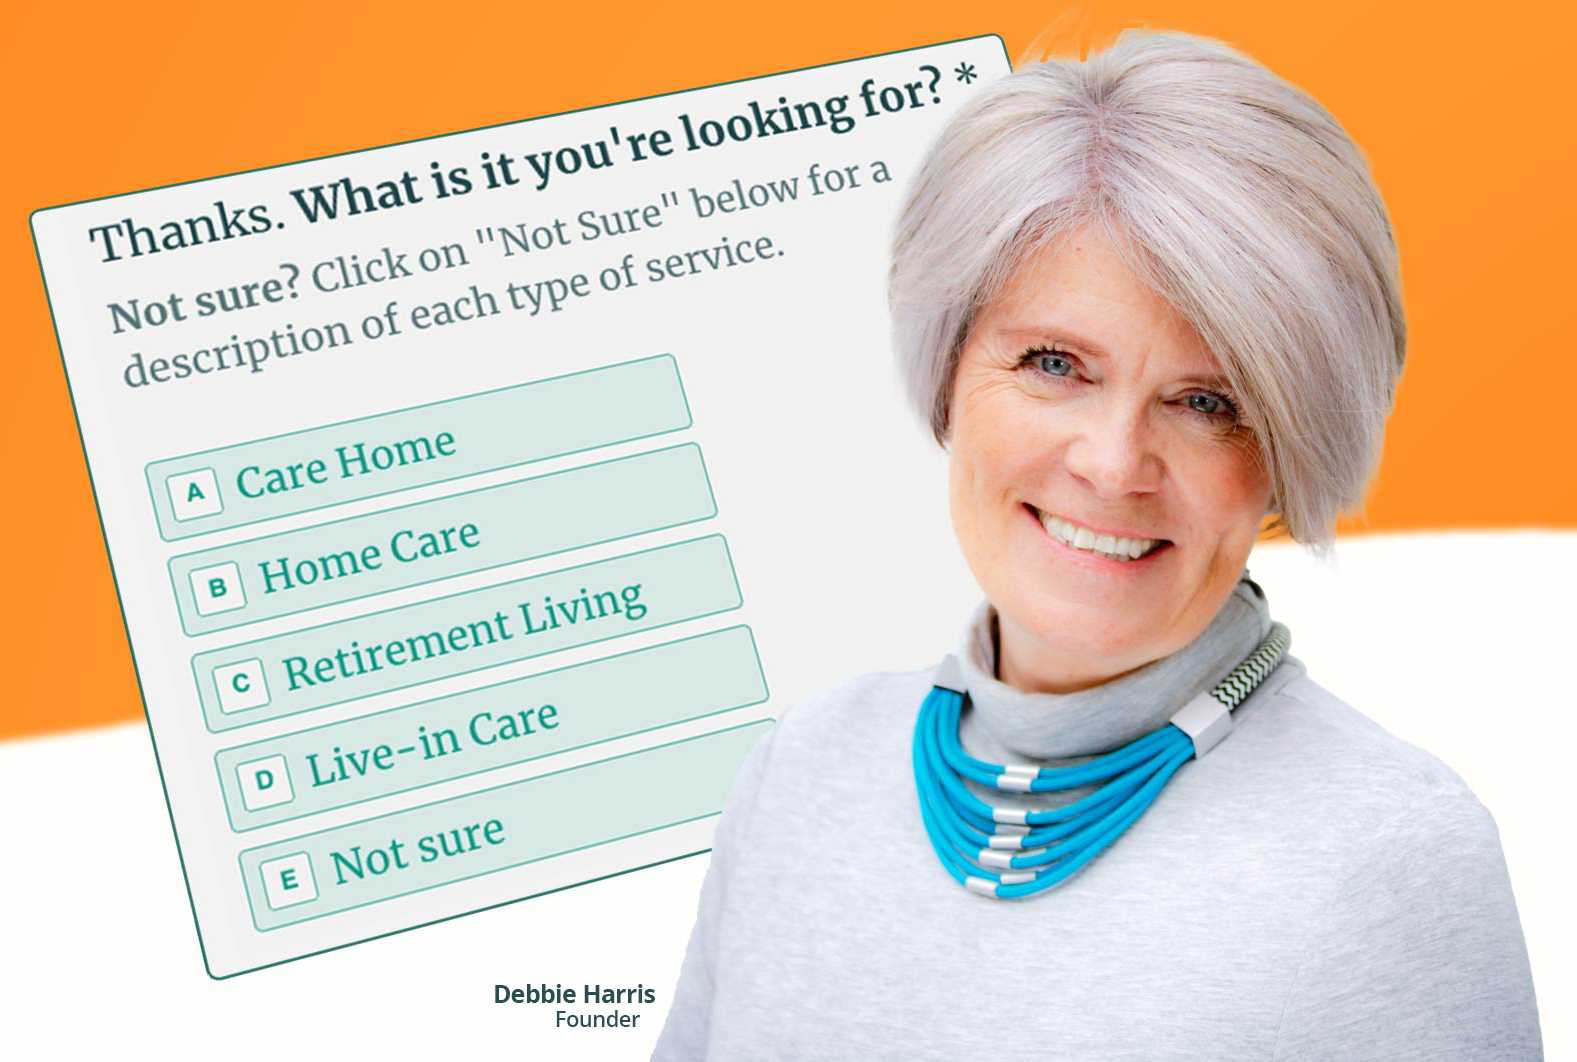 Debbie Harris, founder of Autumna with an image from a home care shortlisting questionnaire.